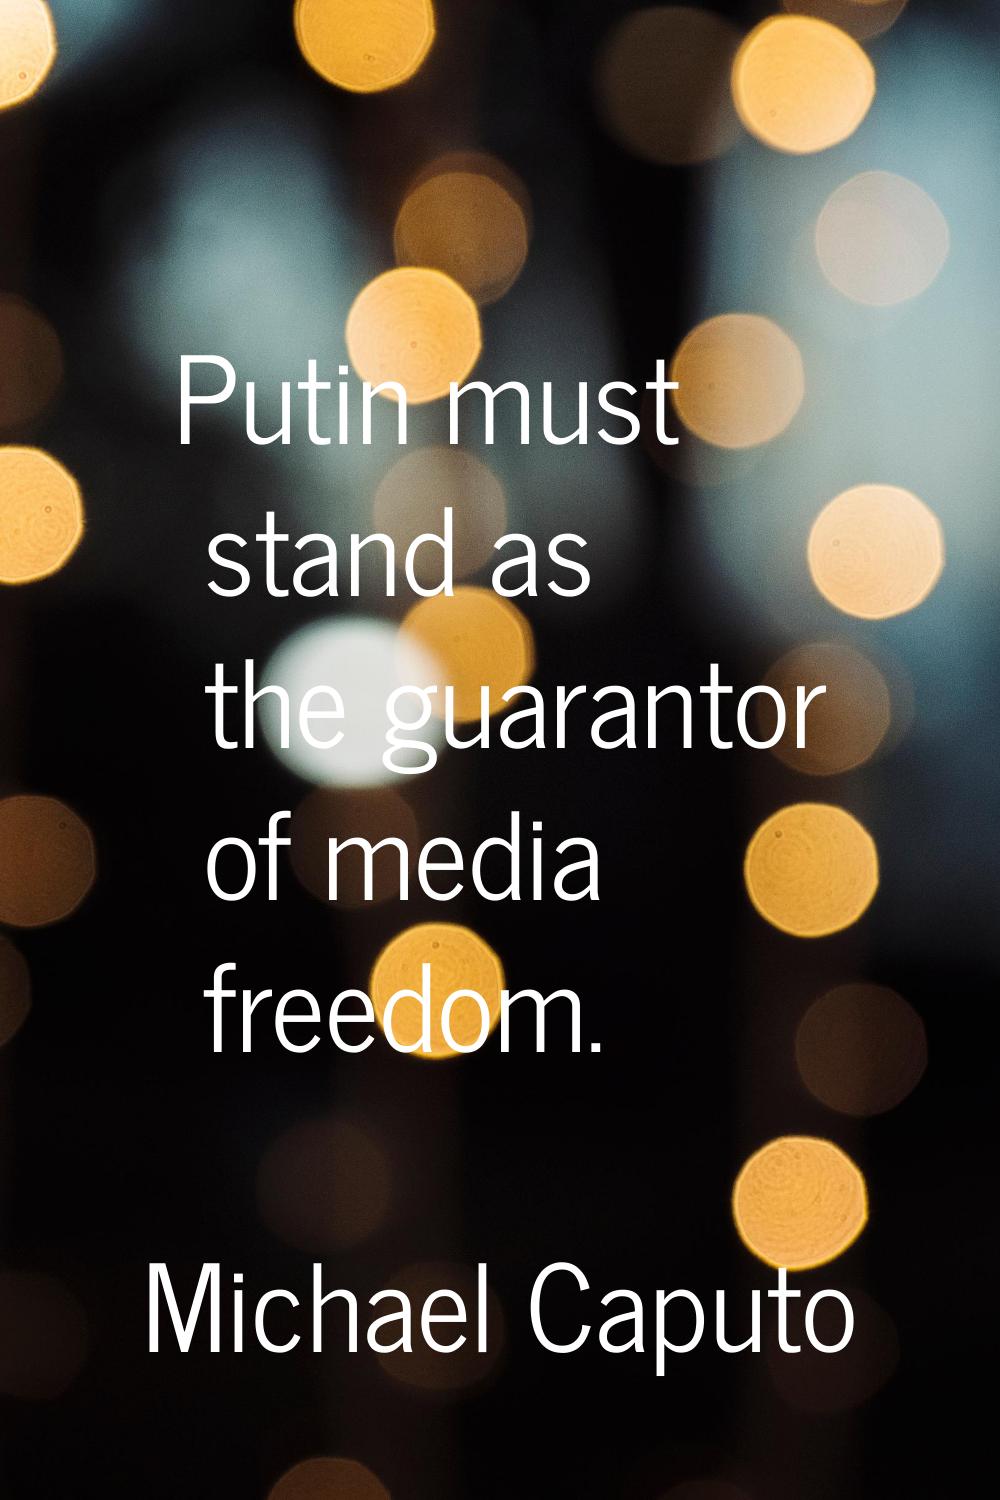 Putin must stand as the guarantor of media freedom.